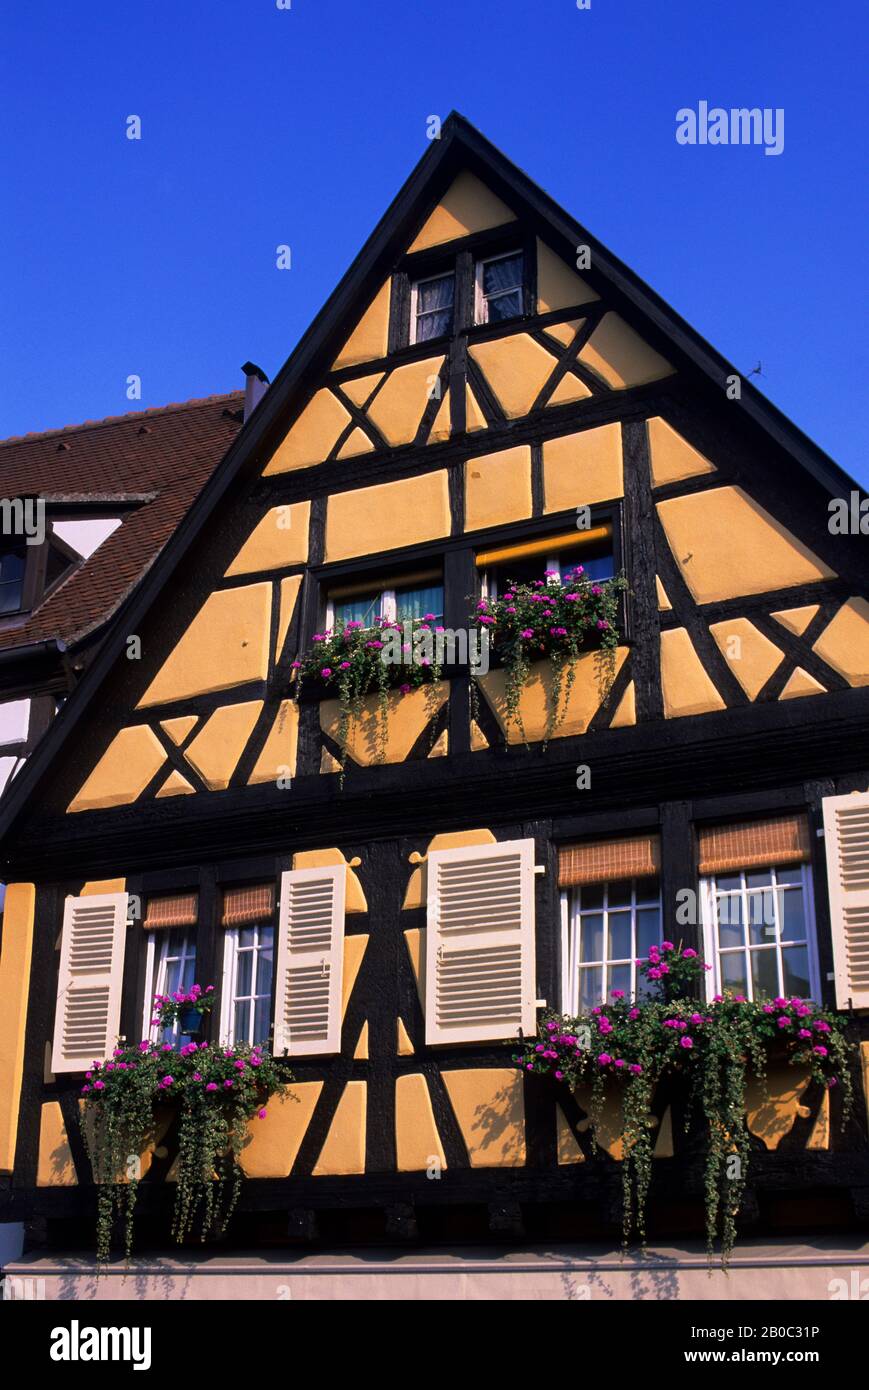 FRANCE, COLMAR, HALFTIMBERED HOUSE Stock Photo